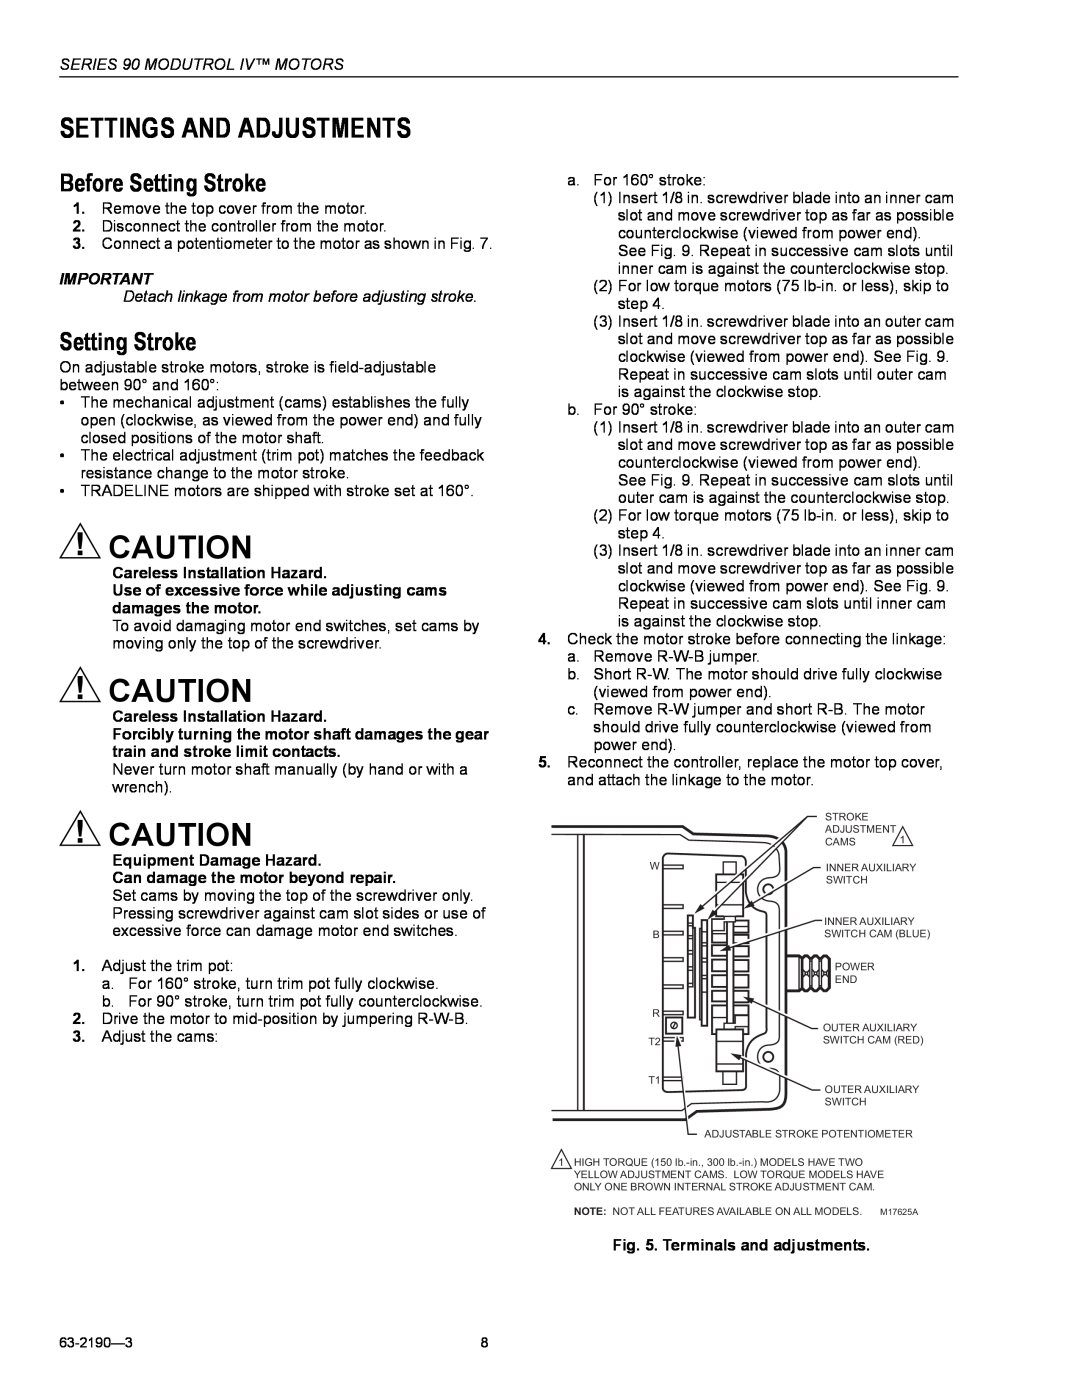 Honeywell Series 90 Settings And Adjustments, Before Setting Stroke, Detach linkage from motor before adjusting stroke 